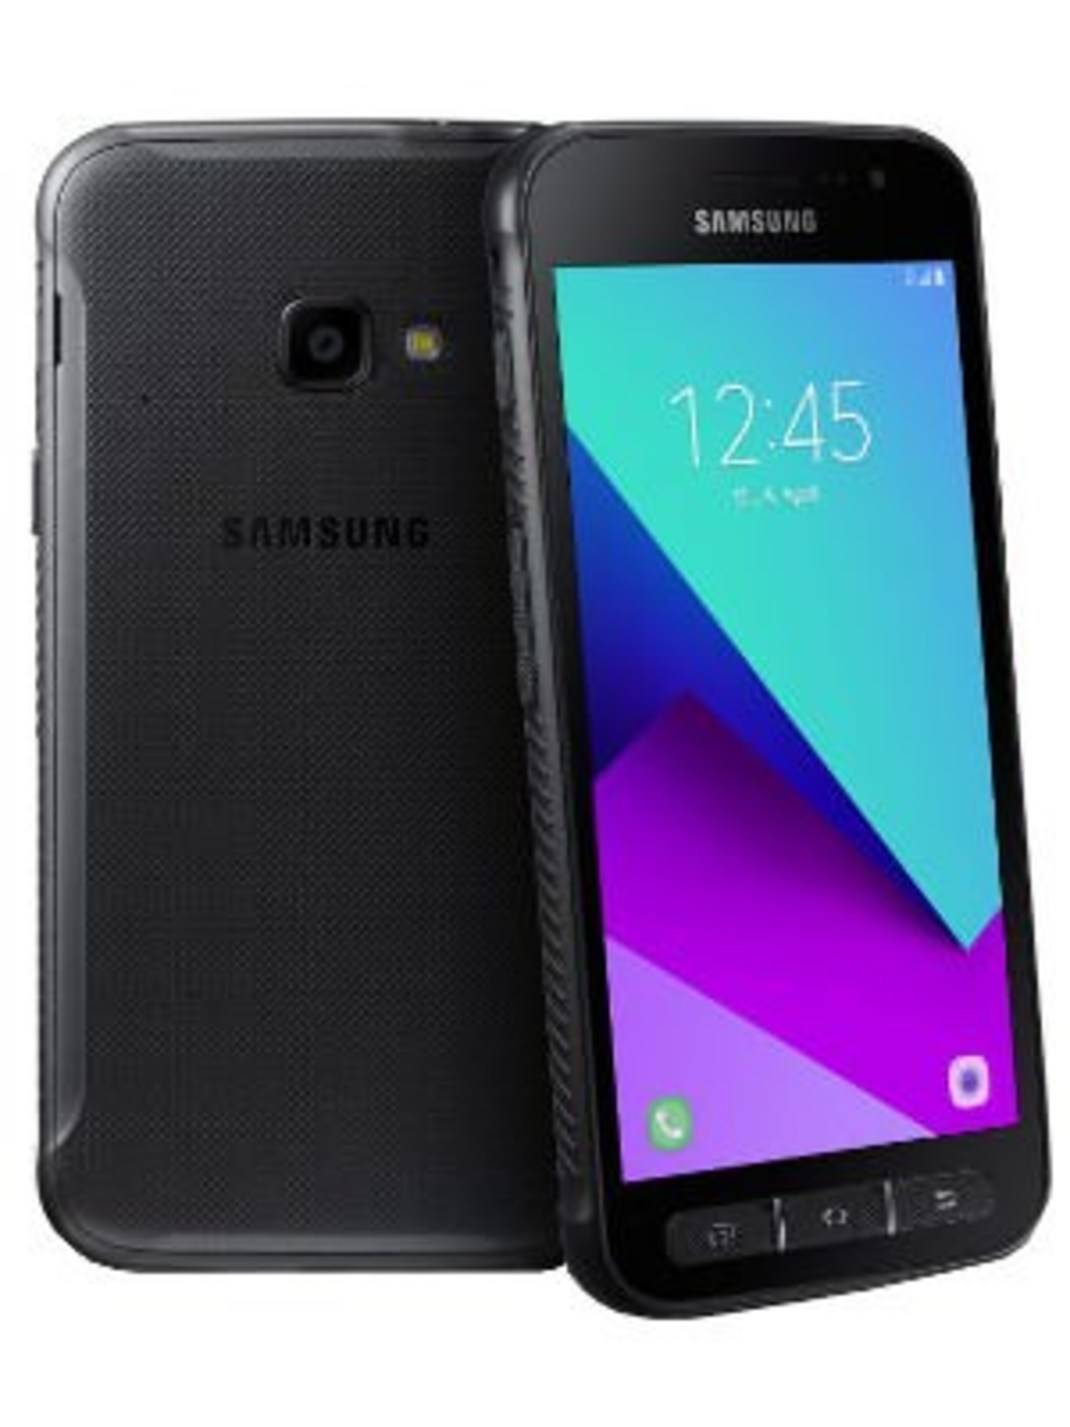 Compare Samsung Galaxy Xcover 4 Vs Samsung Galaxy Xcover Pro Price Specs Review Gadgets Now